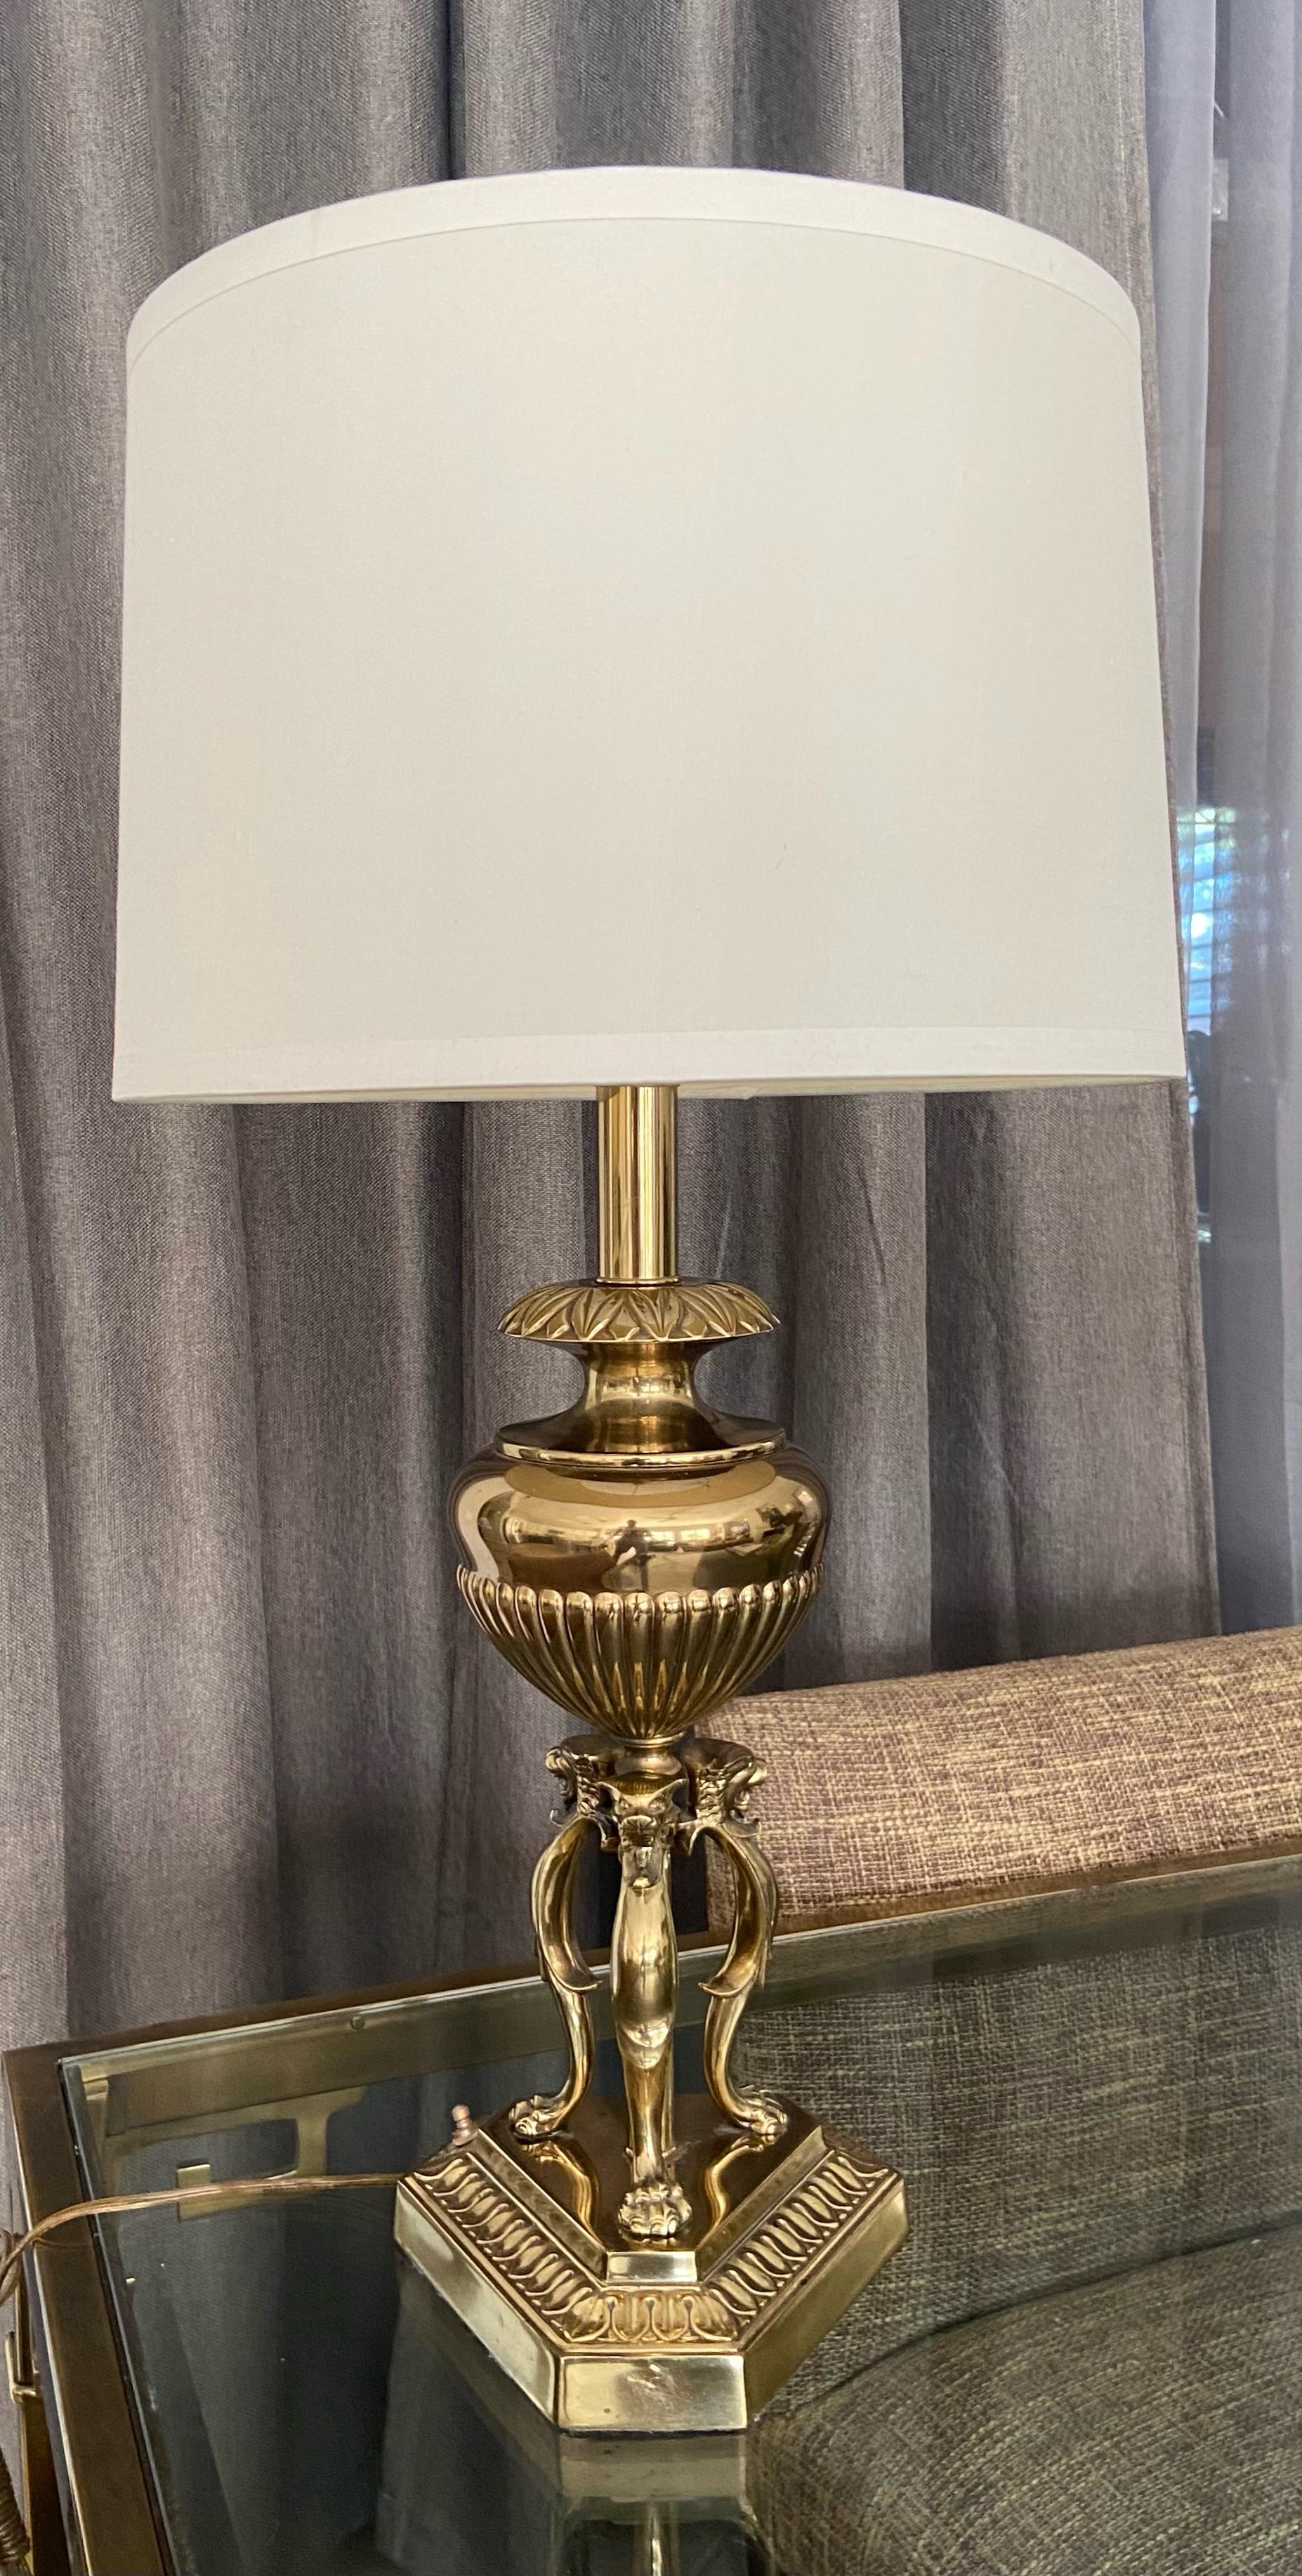 Single solid brass lion head and paw motif table lamp. Has 3-way push button on/off switch, made by the well known lighting manufacturer 